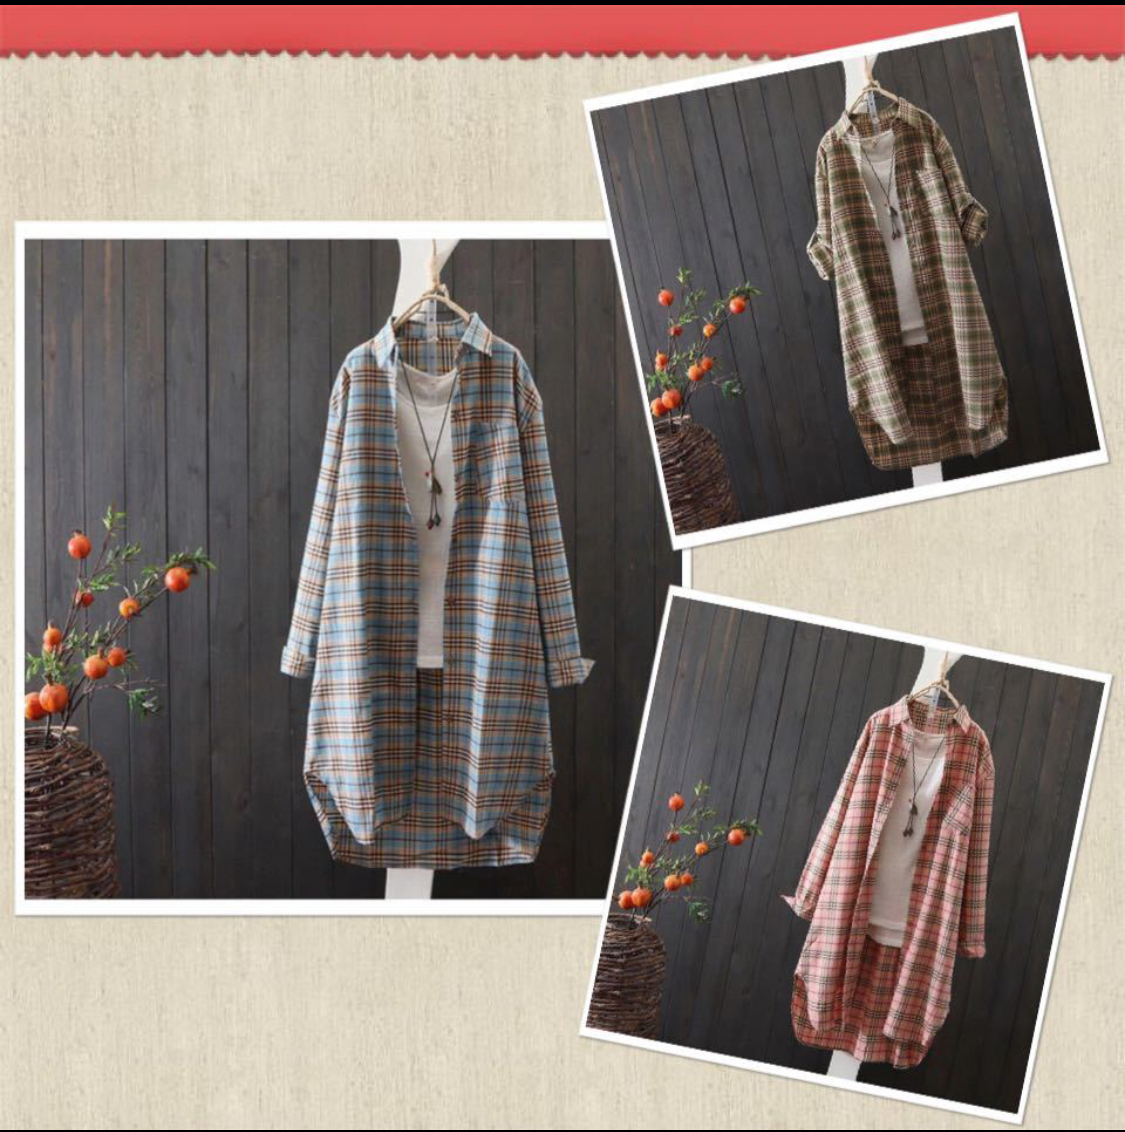  shirt One-piece long shirt check pattern tunic easy long sleeve spring lady's spring summer autumn blue S size 